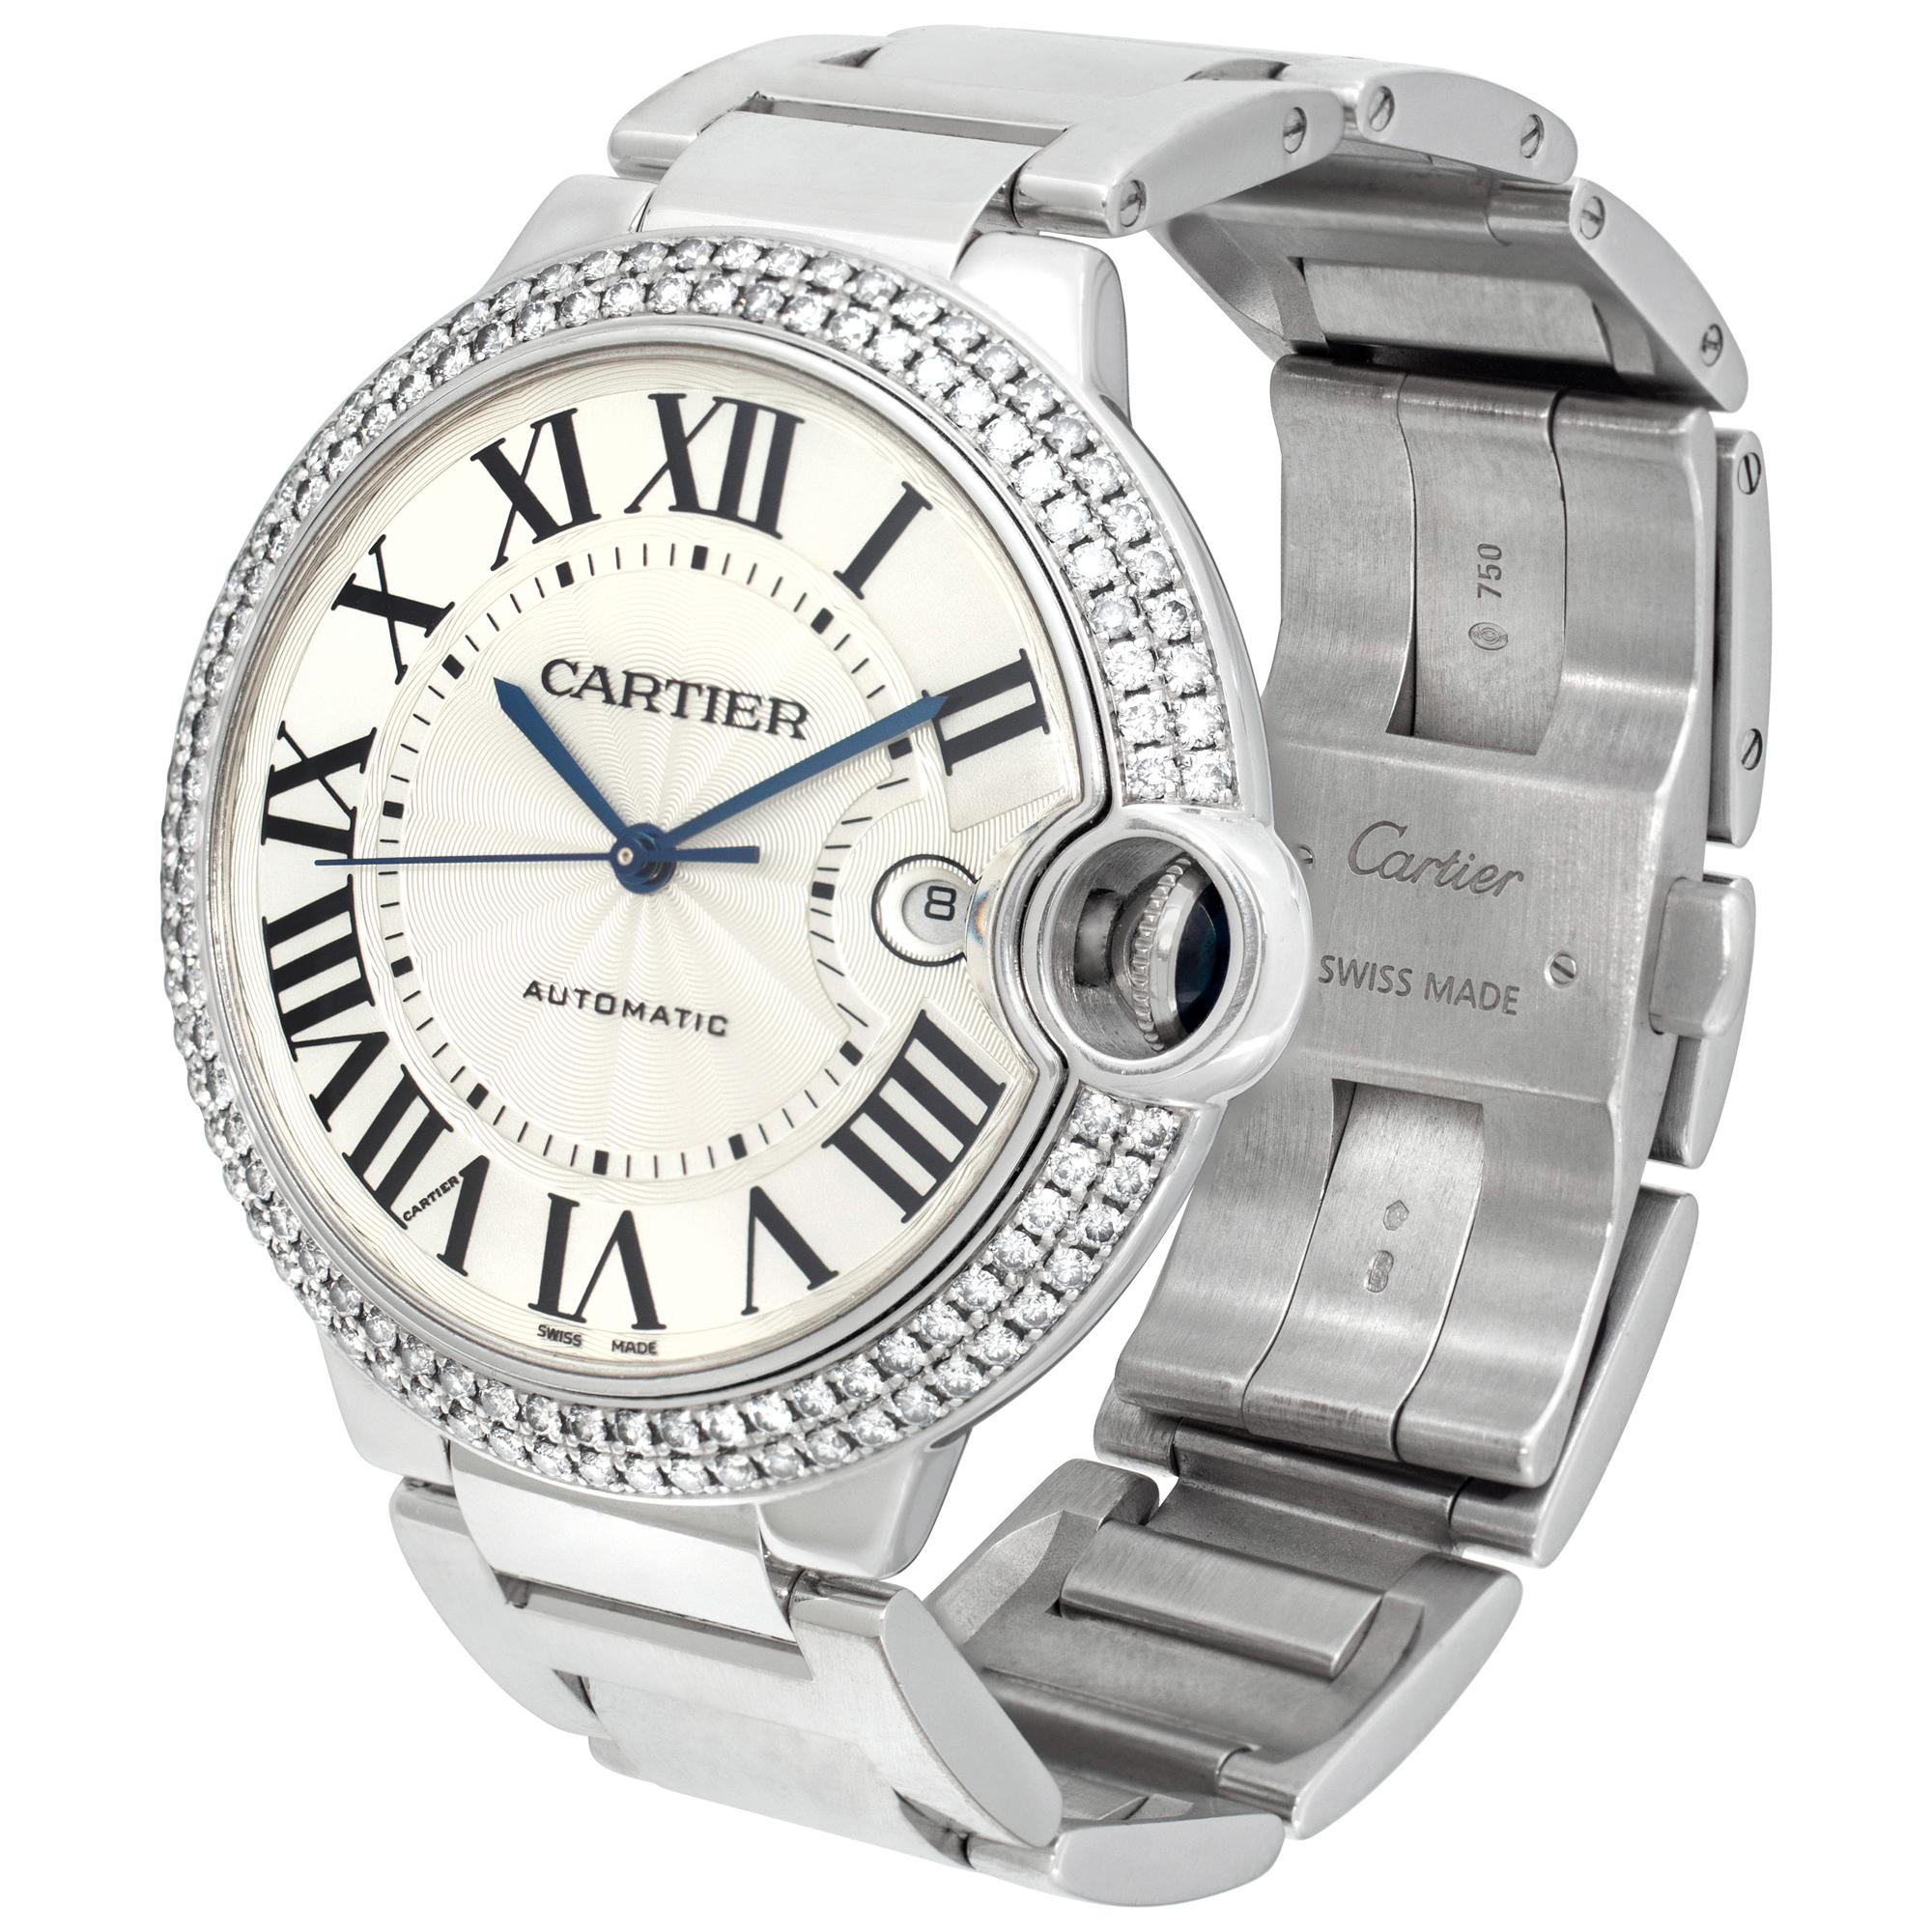 Cartier Ballon Bleu 42 mm in 18k white gold with factory original double row diamond bezel. Diamond carat weight 1.83, color F, clarity VSS1-VS2, 126 stones. Gold gram weight: 196.33. Automatic movement with date and blue sword shaped hands. Comes